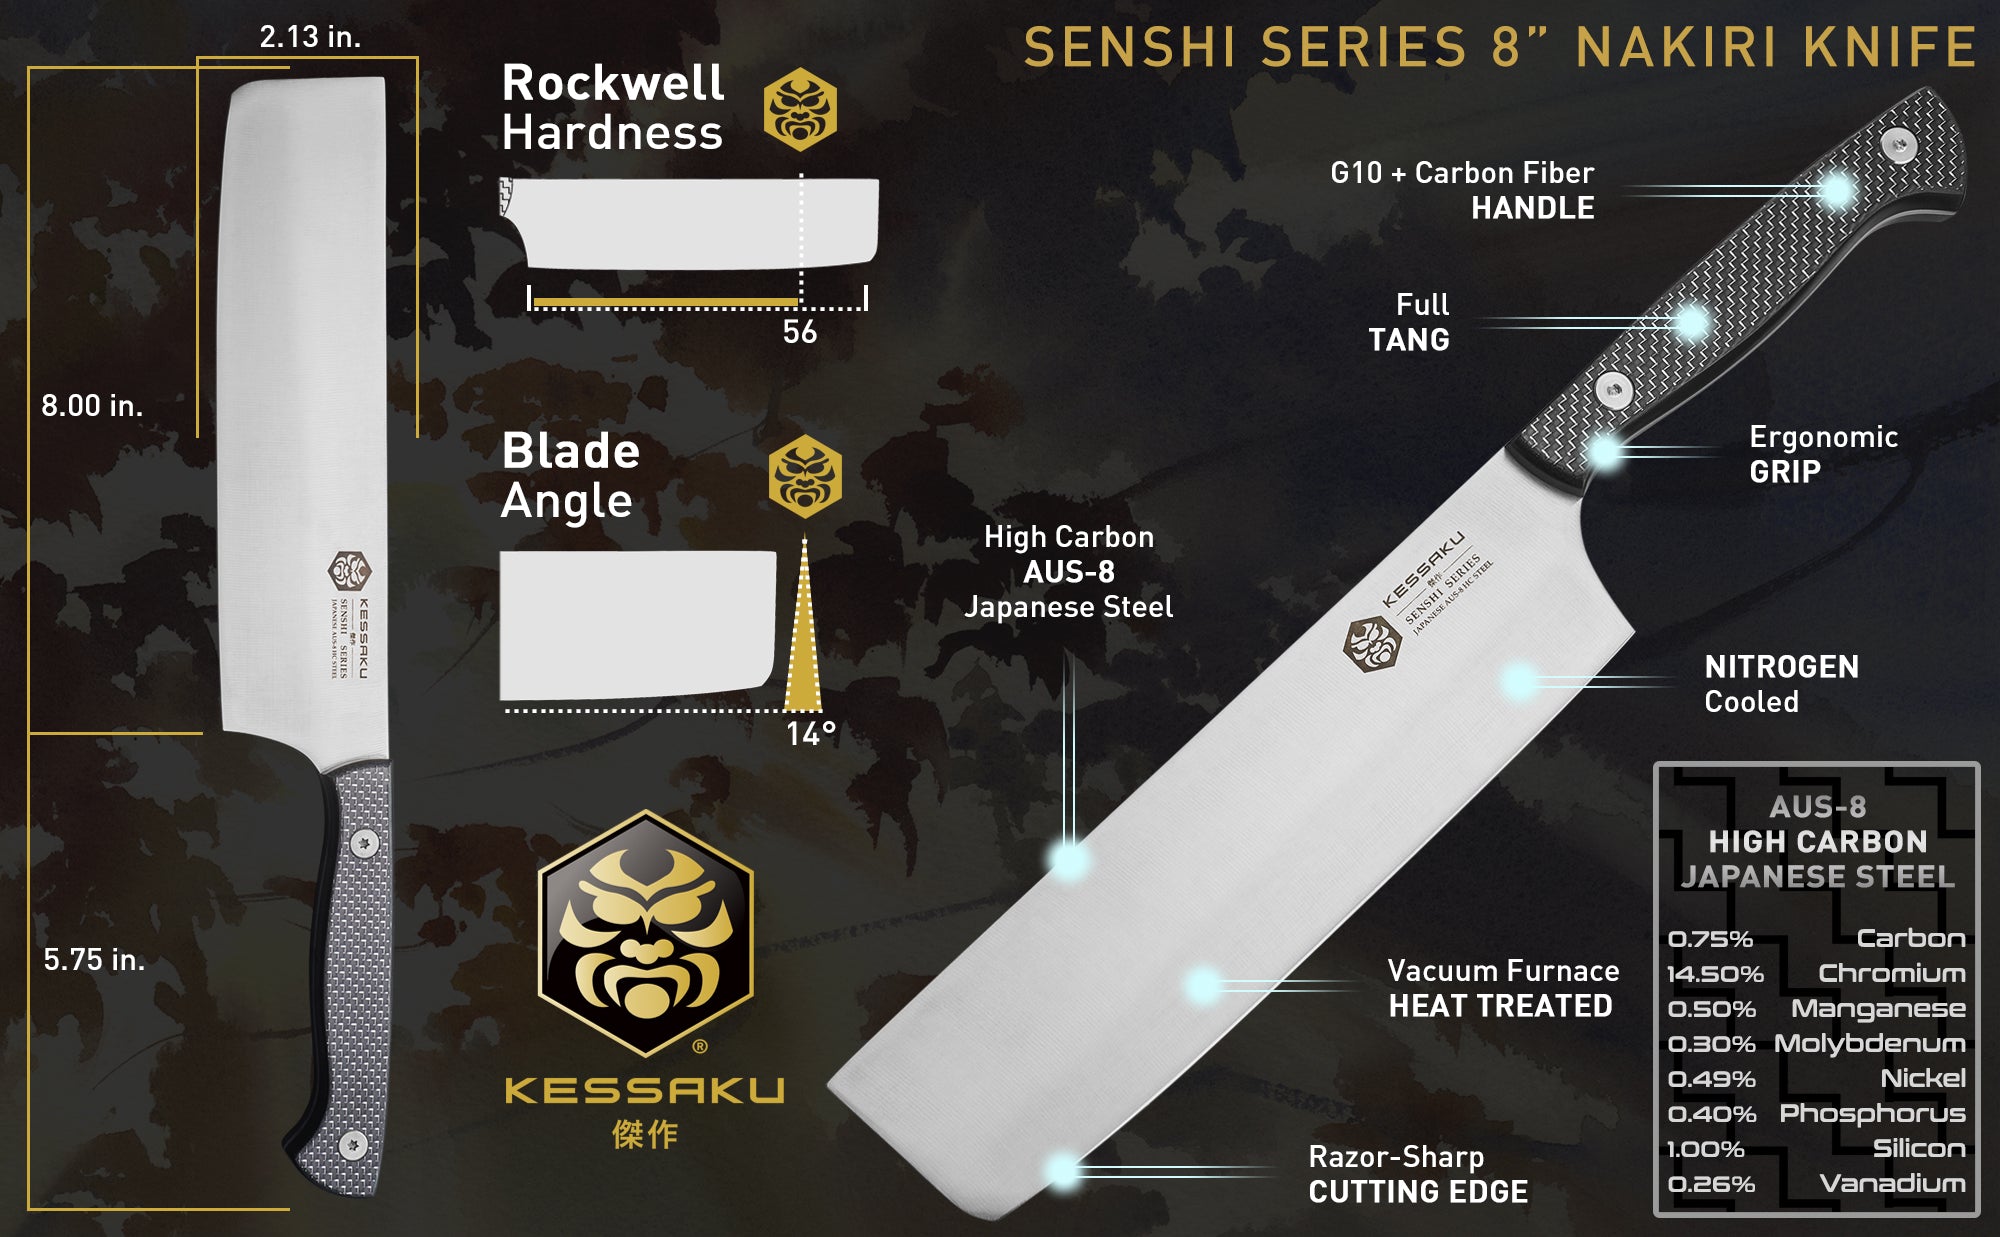 The Kessaku Senshi Series 8-Inch Nakiri Knife's features, dimensions, and steel composition